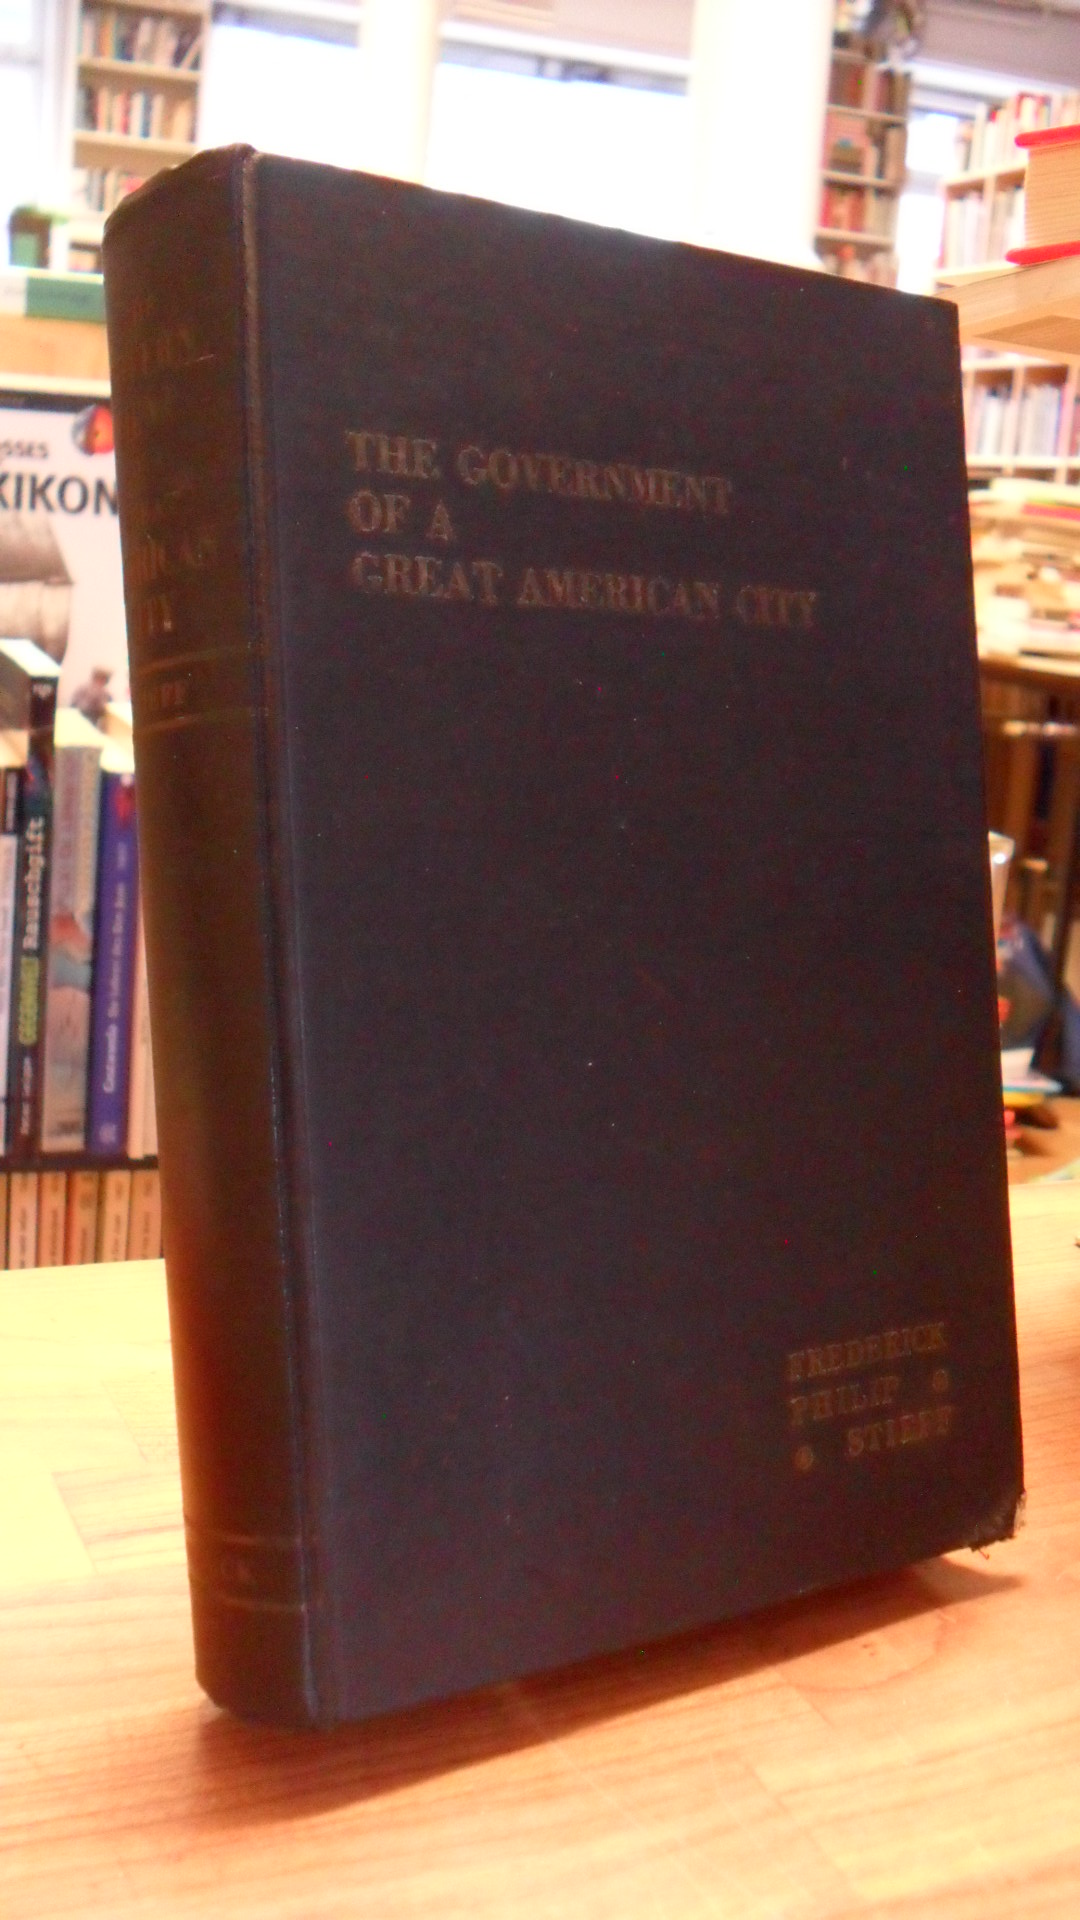 Stieff, The Government of a Great American City [Baltimore],